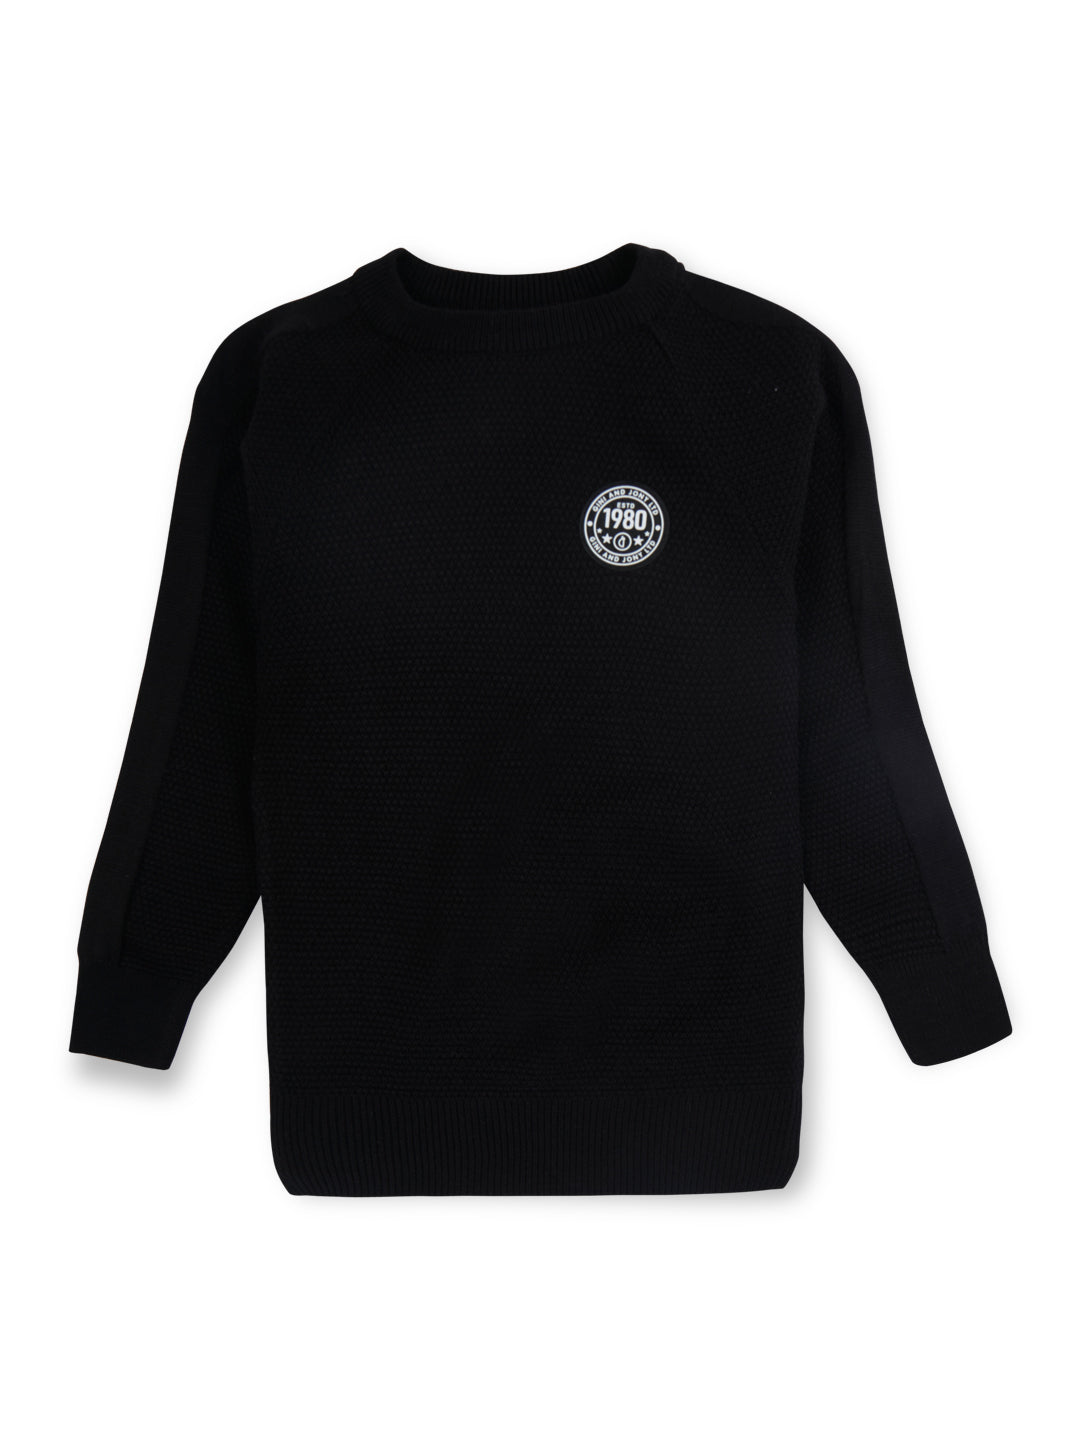 Boys Black Solid Cotton Full Sleeves Sweater